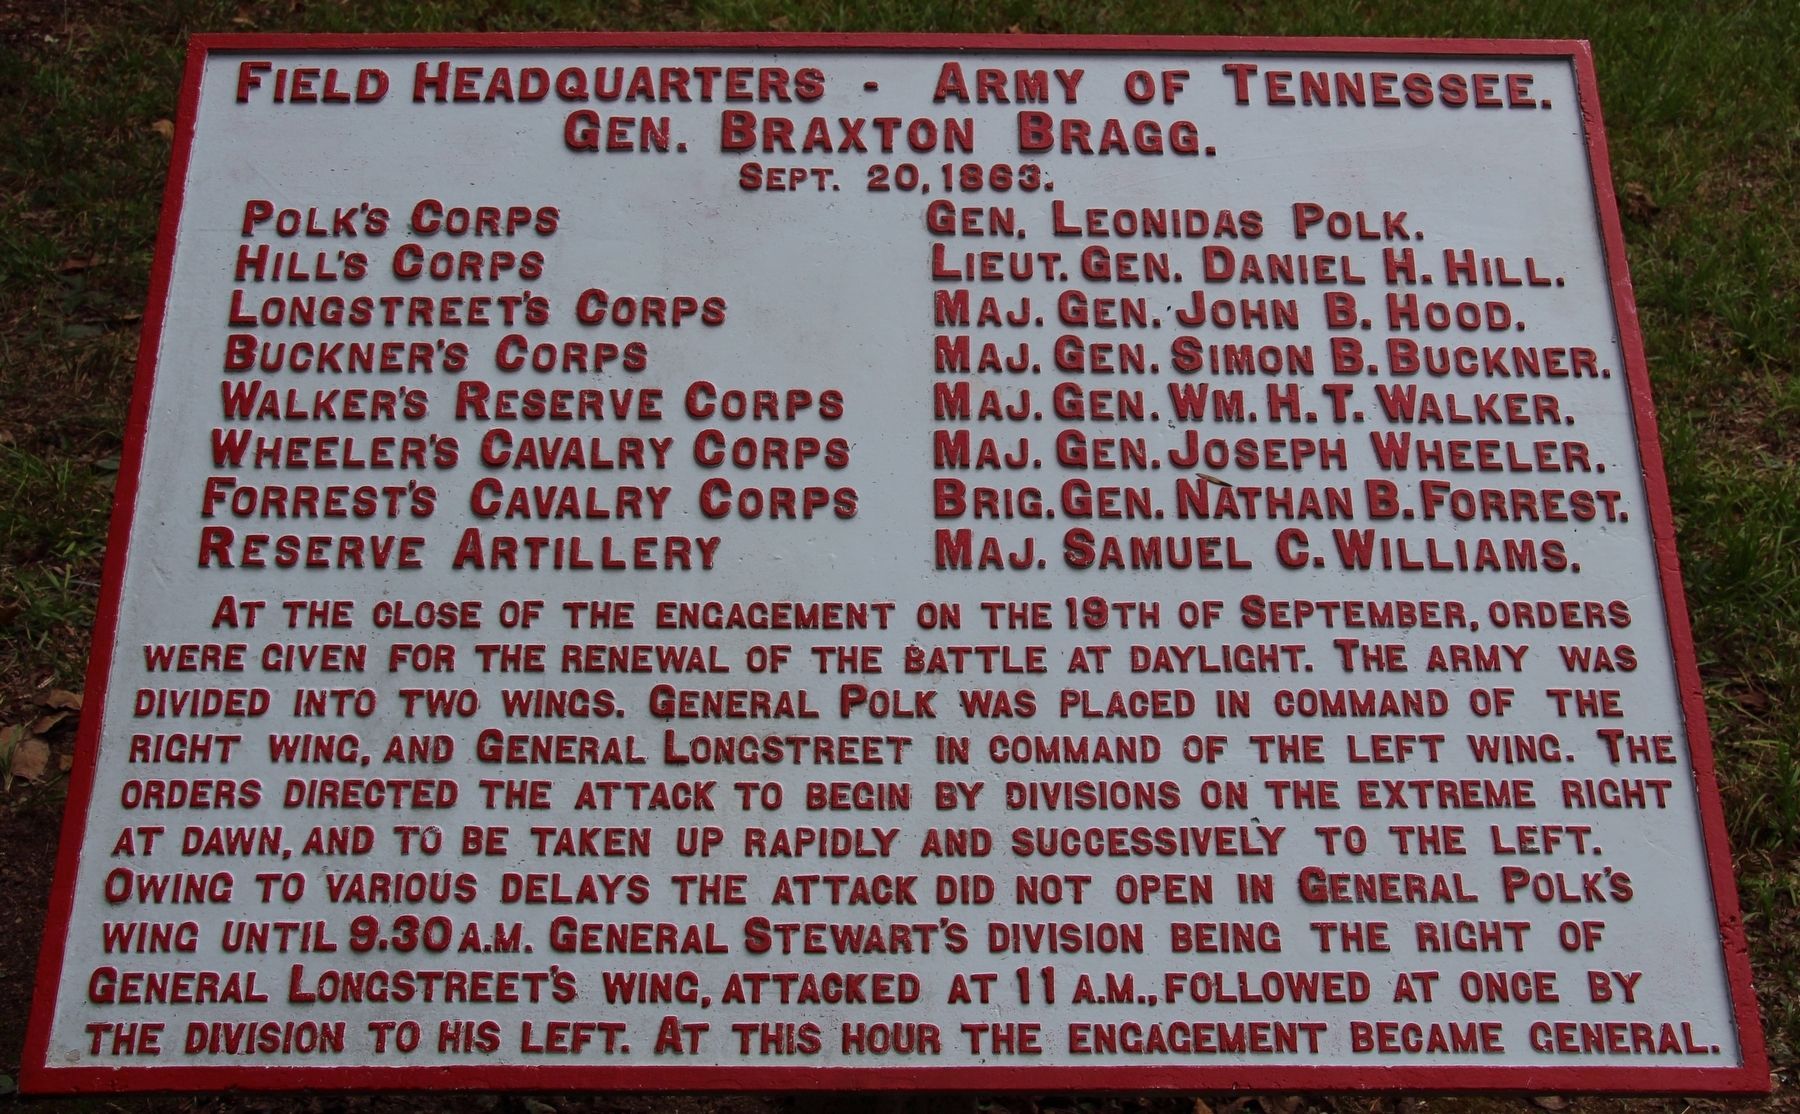 Field Headquarters - Army of Tennessee Marker image. Click for full size.